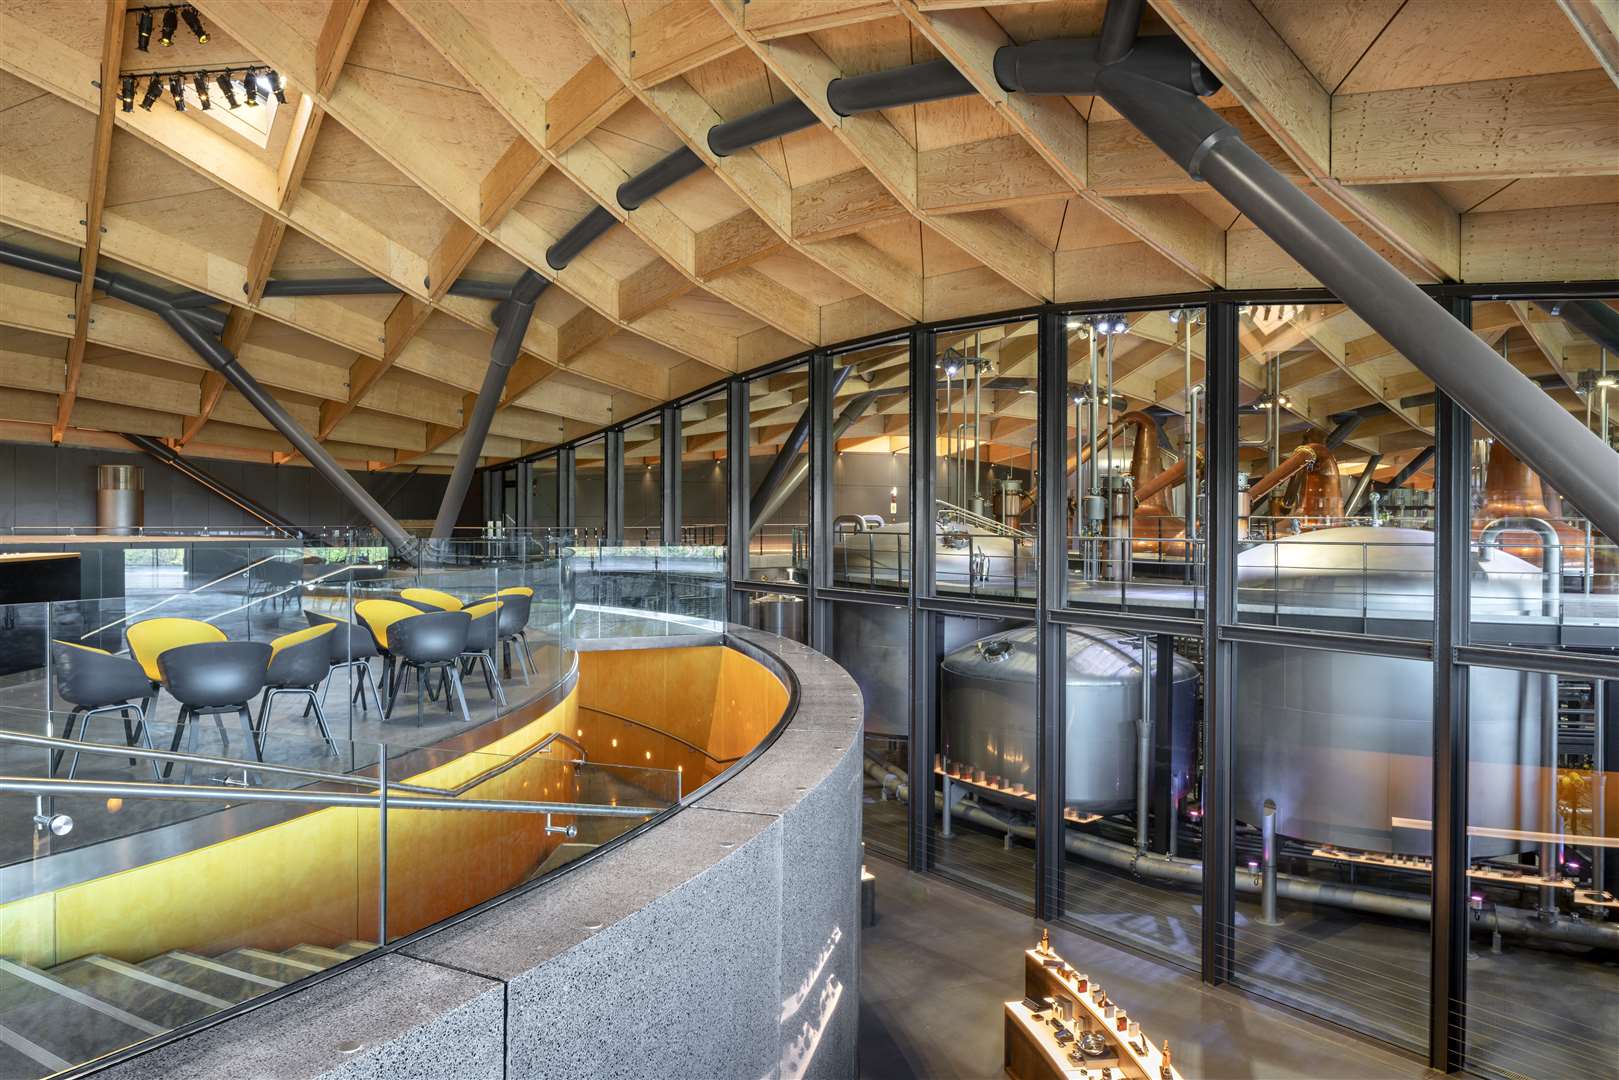 The Macallan Distillery and Visitor Experience, Craigellachie - contract value £140m (Rogers Stirk Harbour + Partners for Edrington). Picture: Joas Souza.